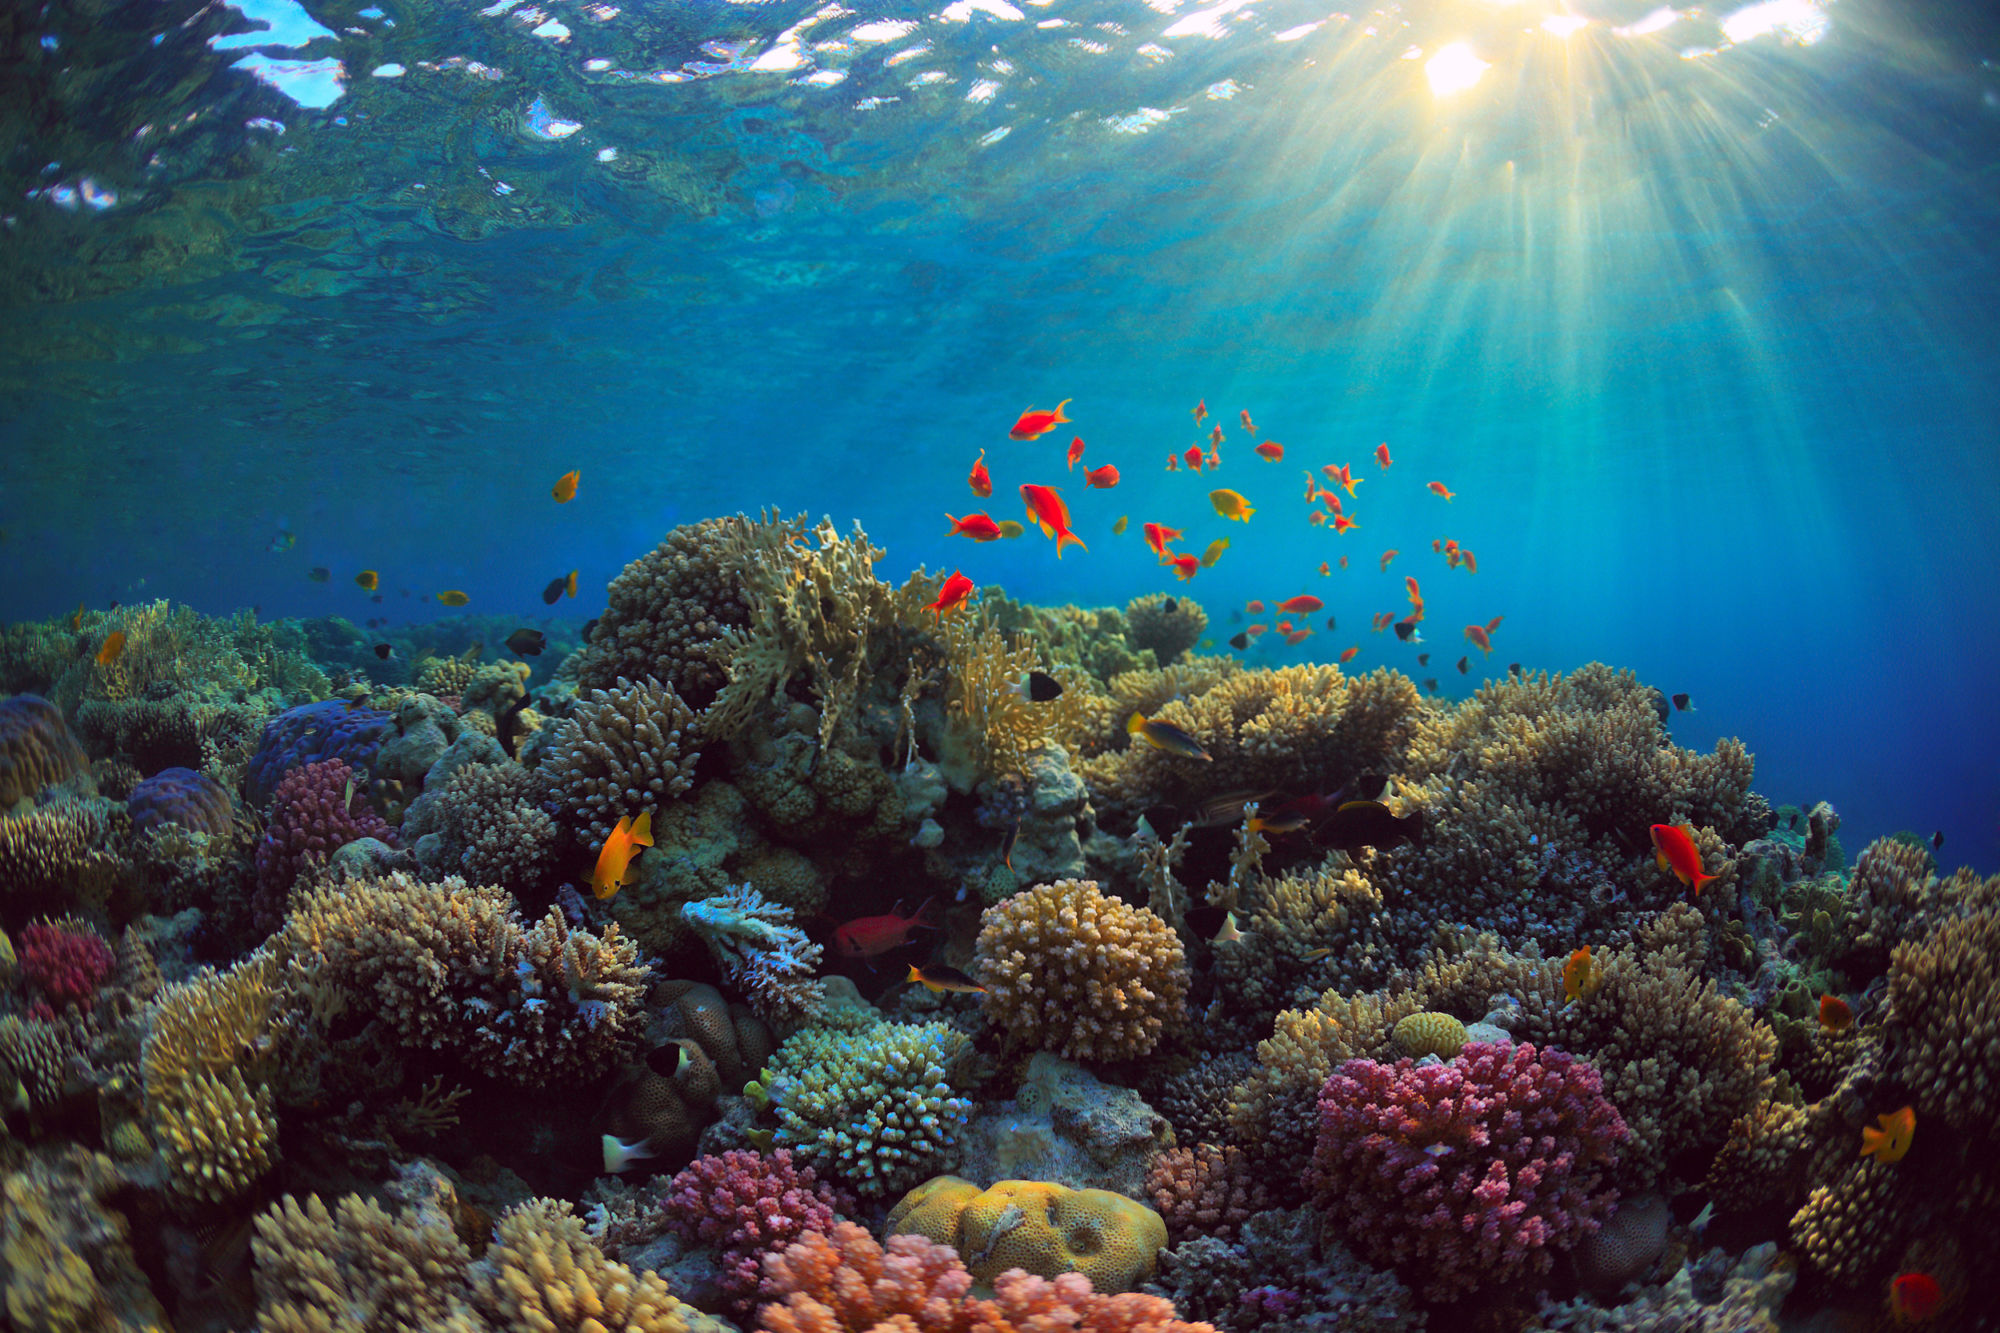 Celebrating Our Oceans: Fun Facts About Marine Life